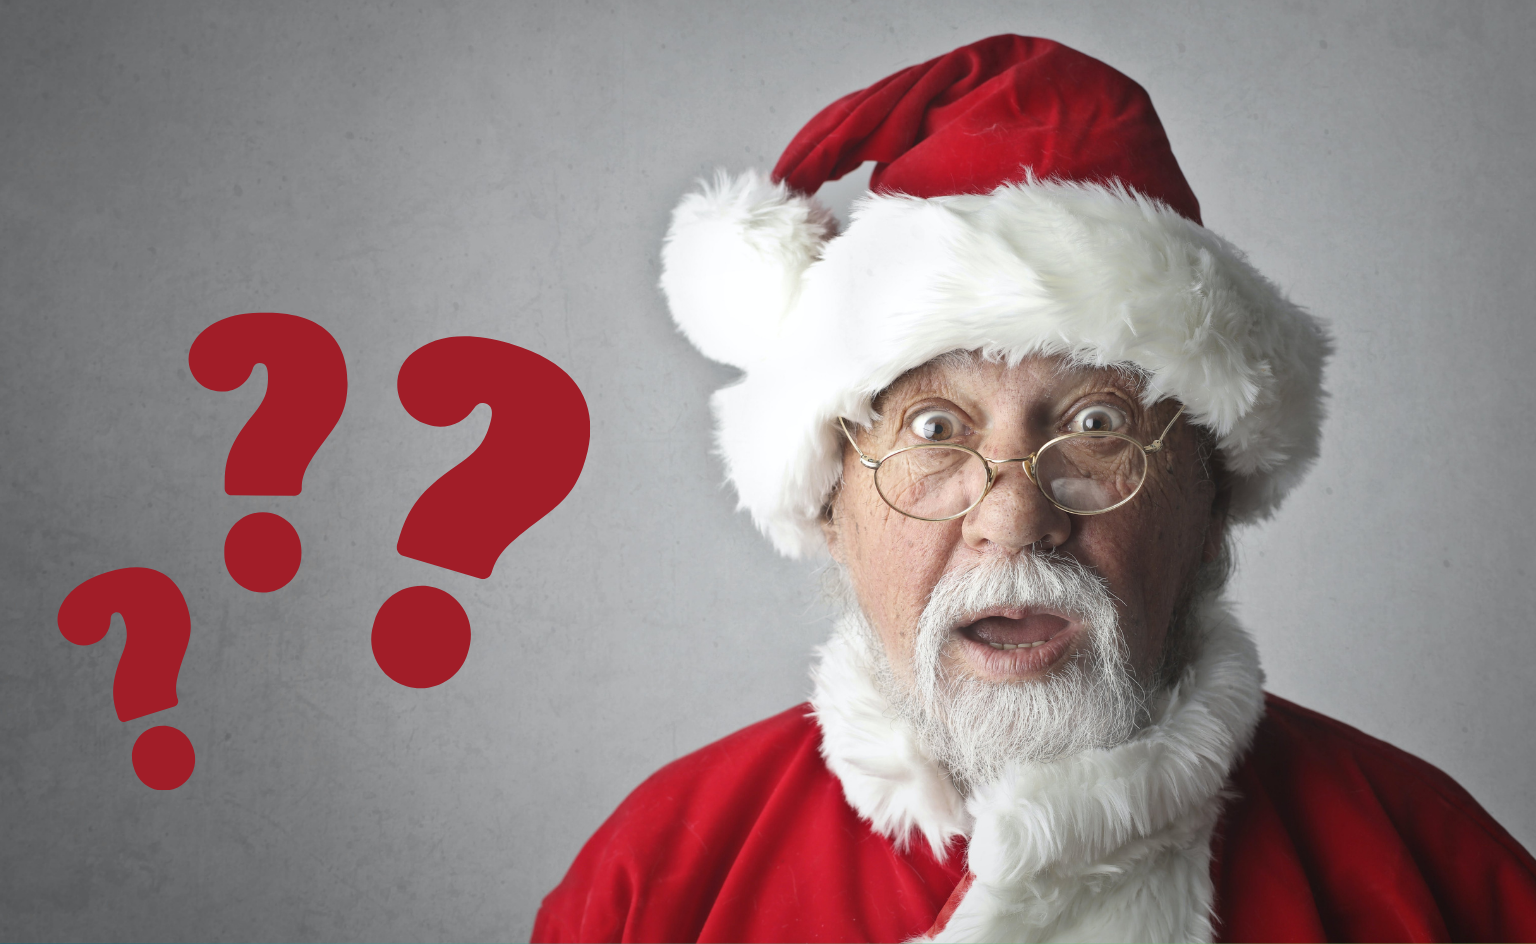 Surprised Santa clause with question marks